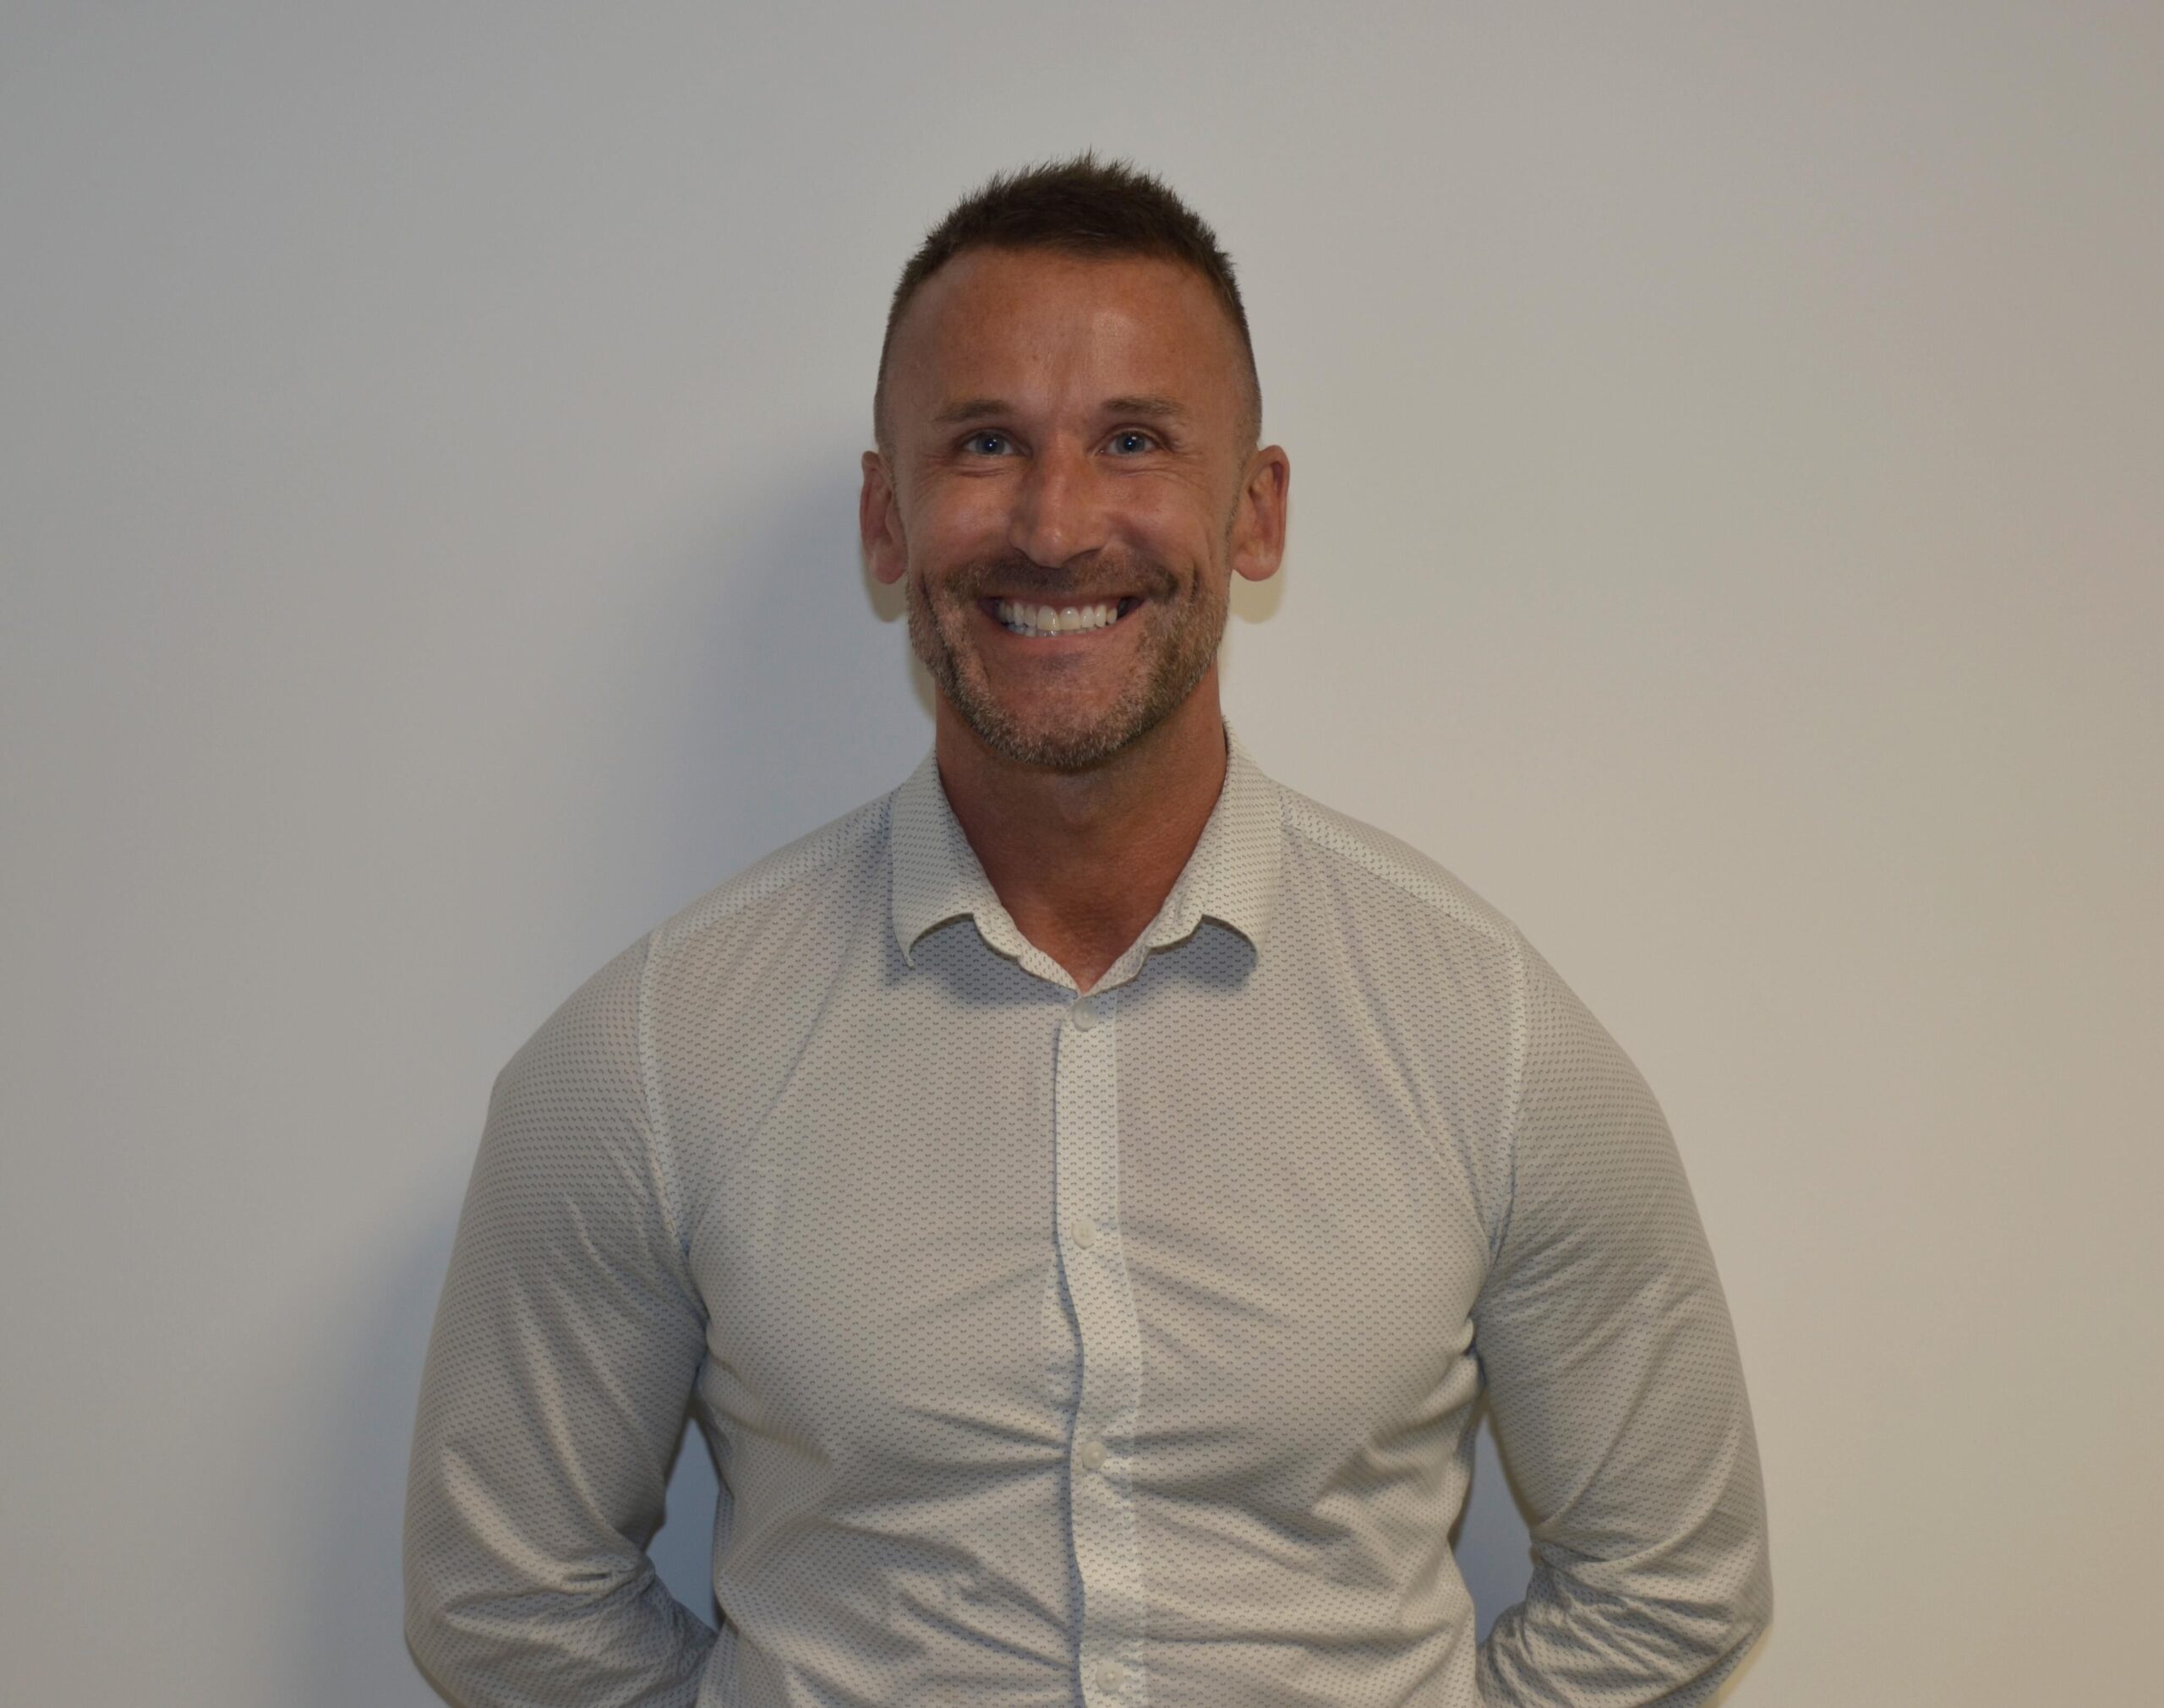 Thorite appoints new Business Development Manager to drive growth in North East